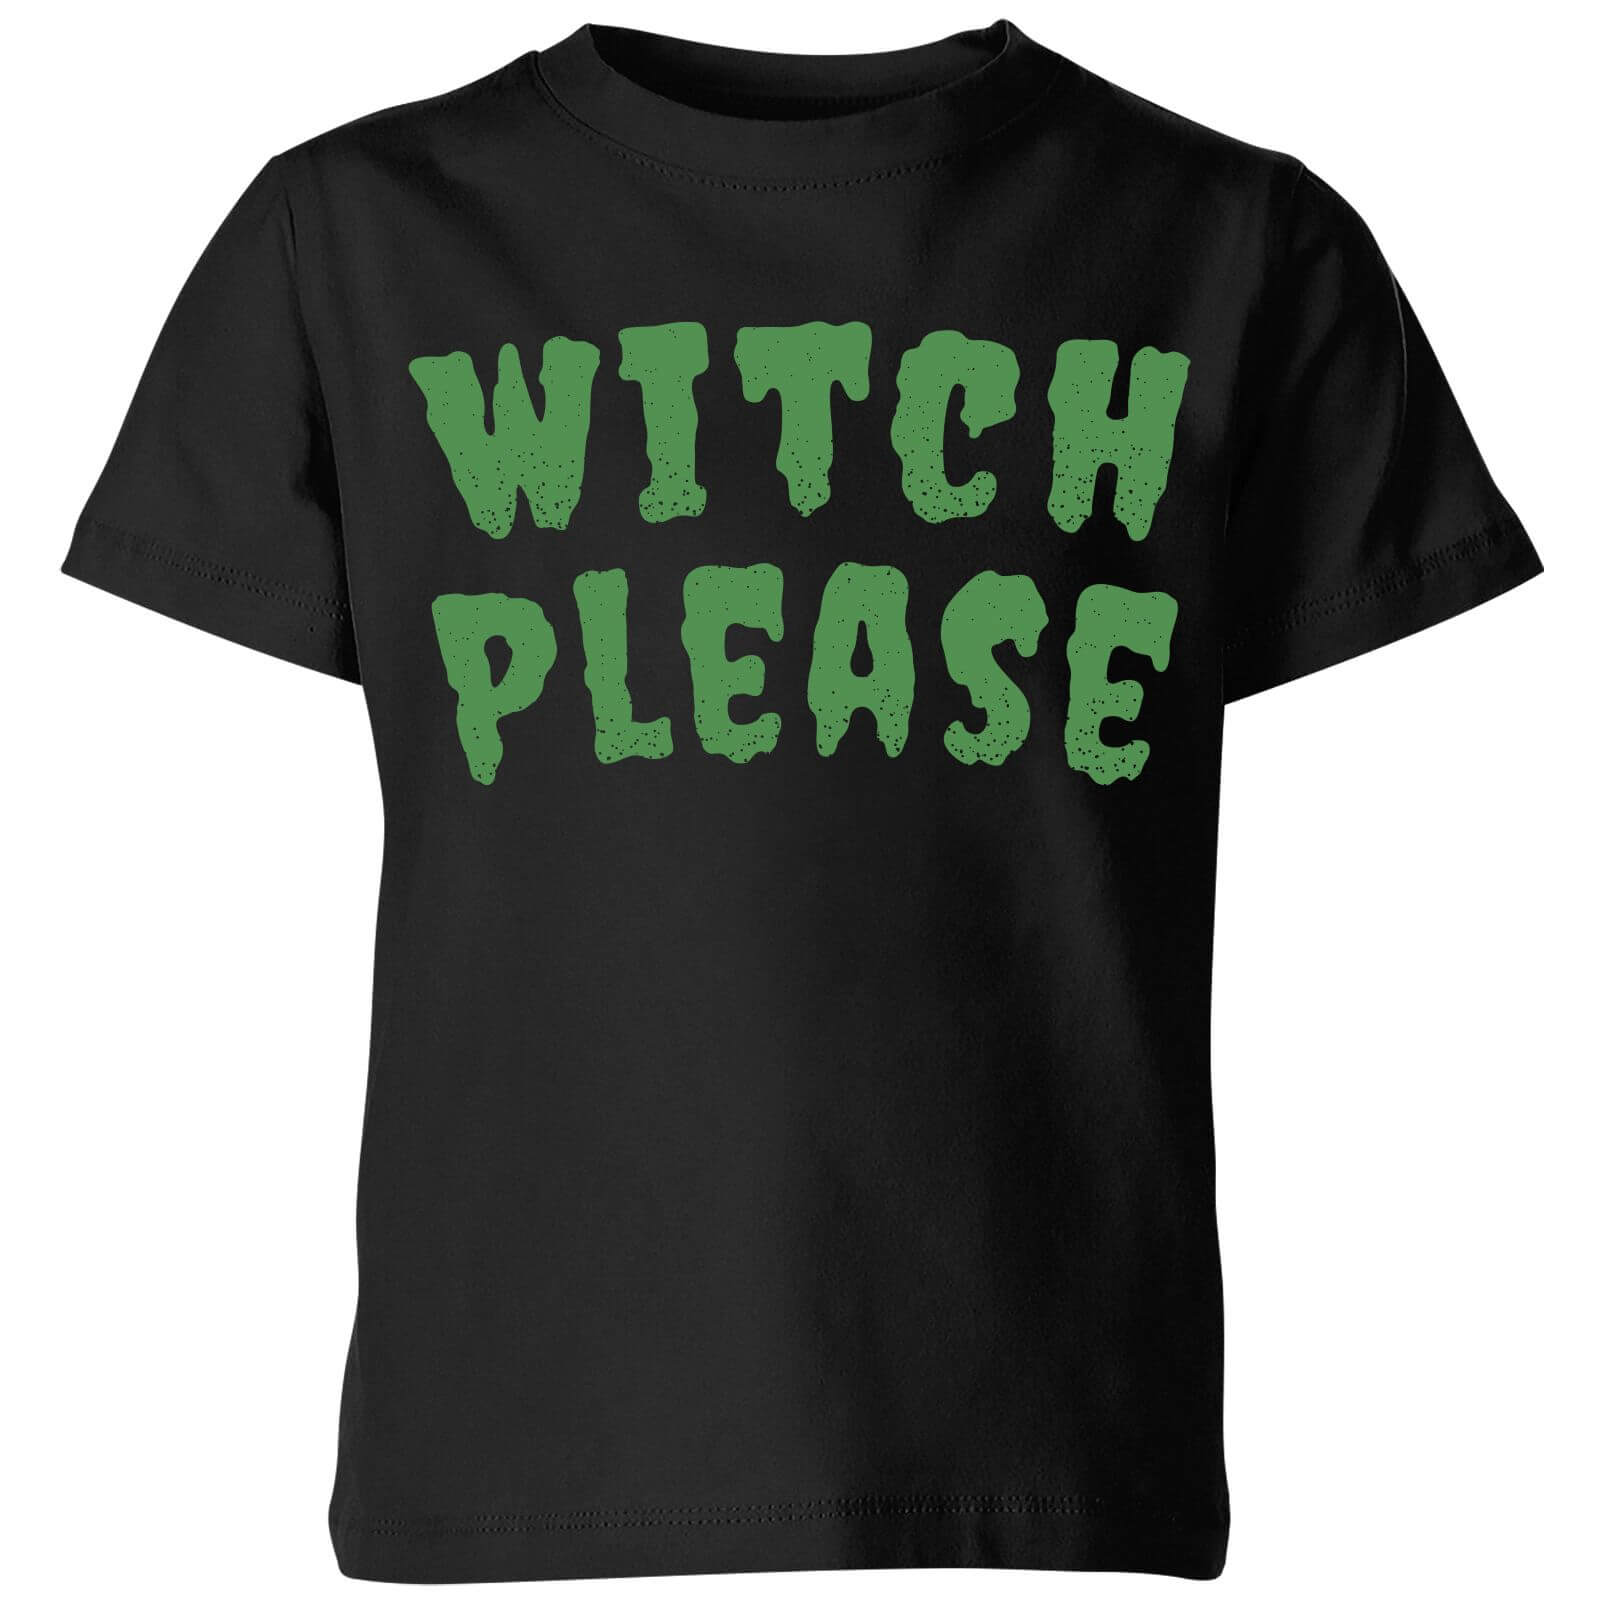 Witch Please Kids' T-Shirt - Black - 3-4 Years - Black